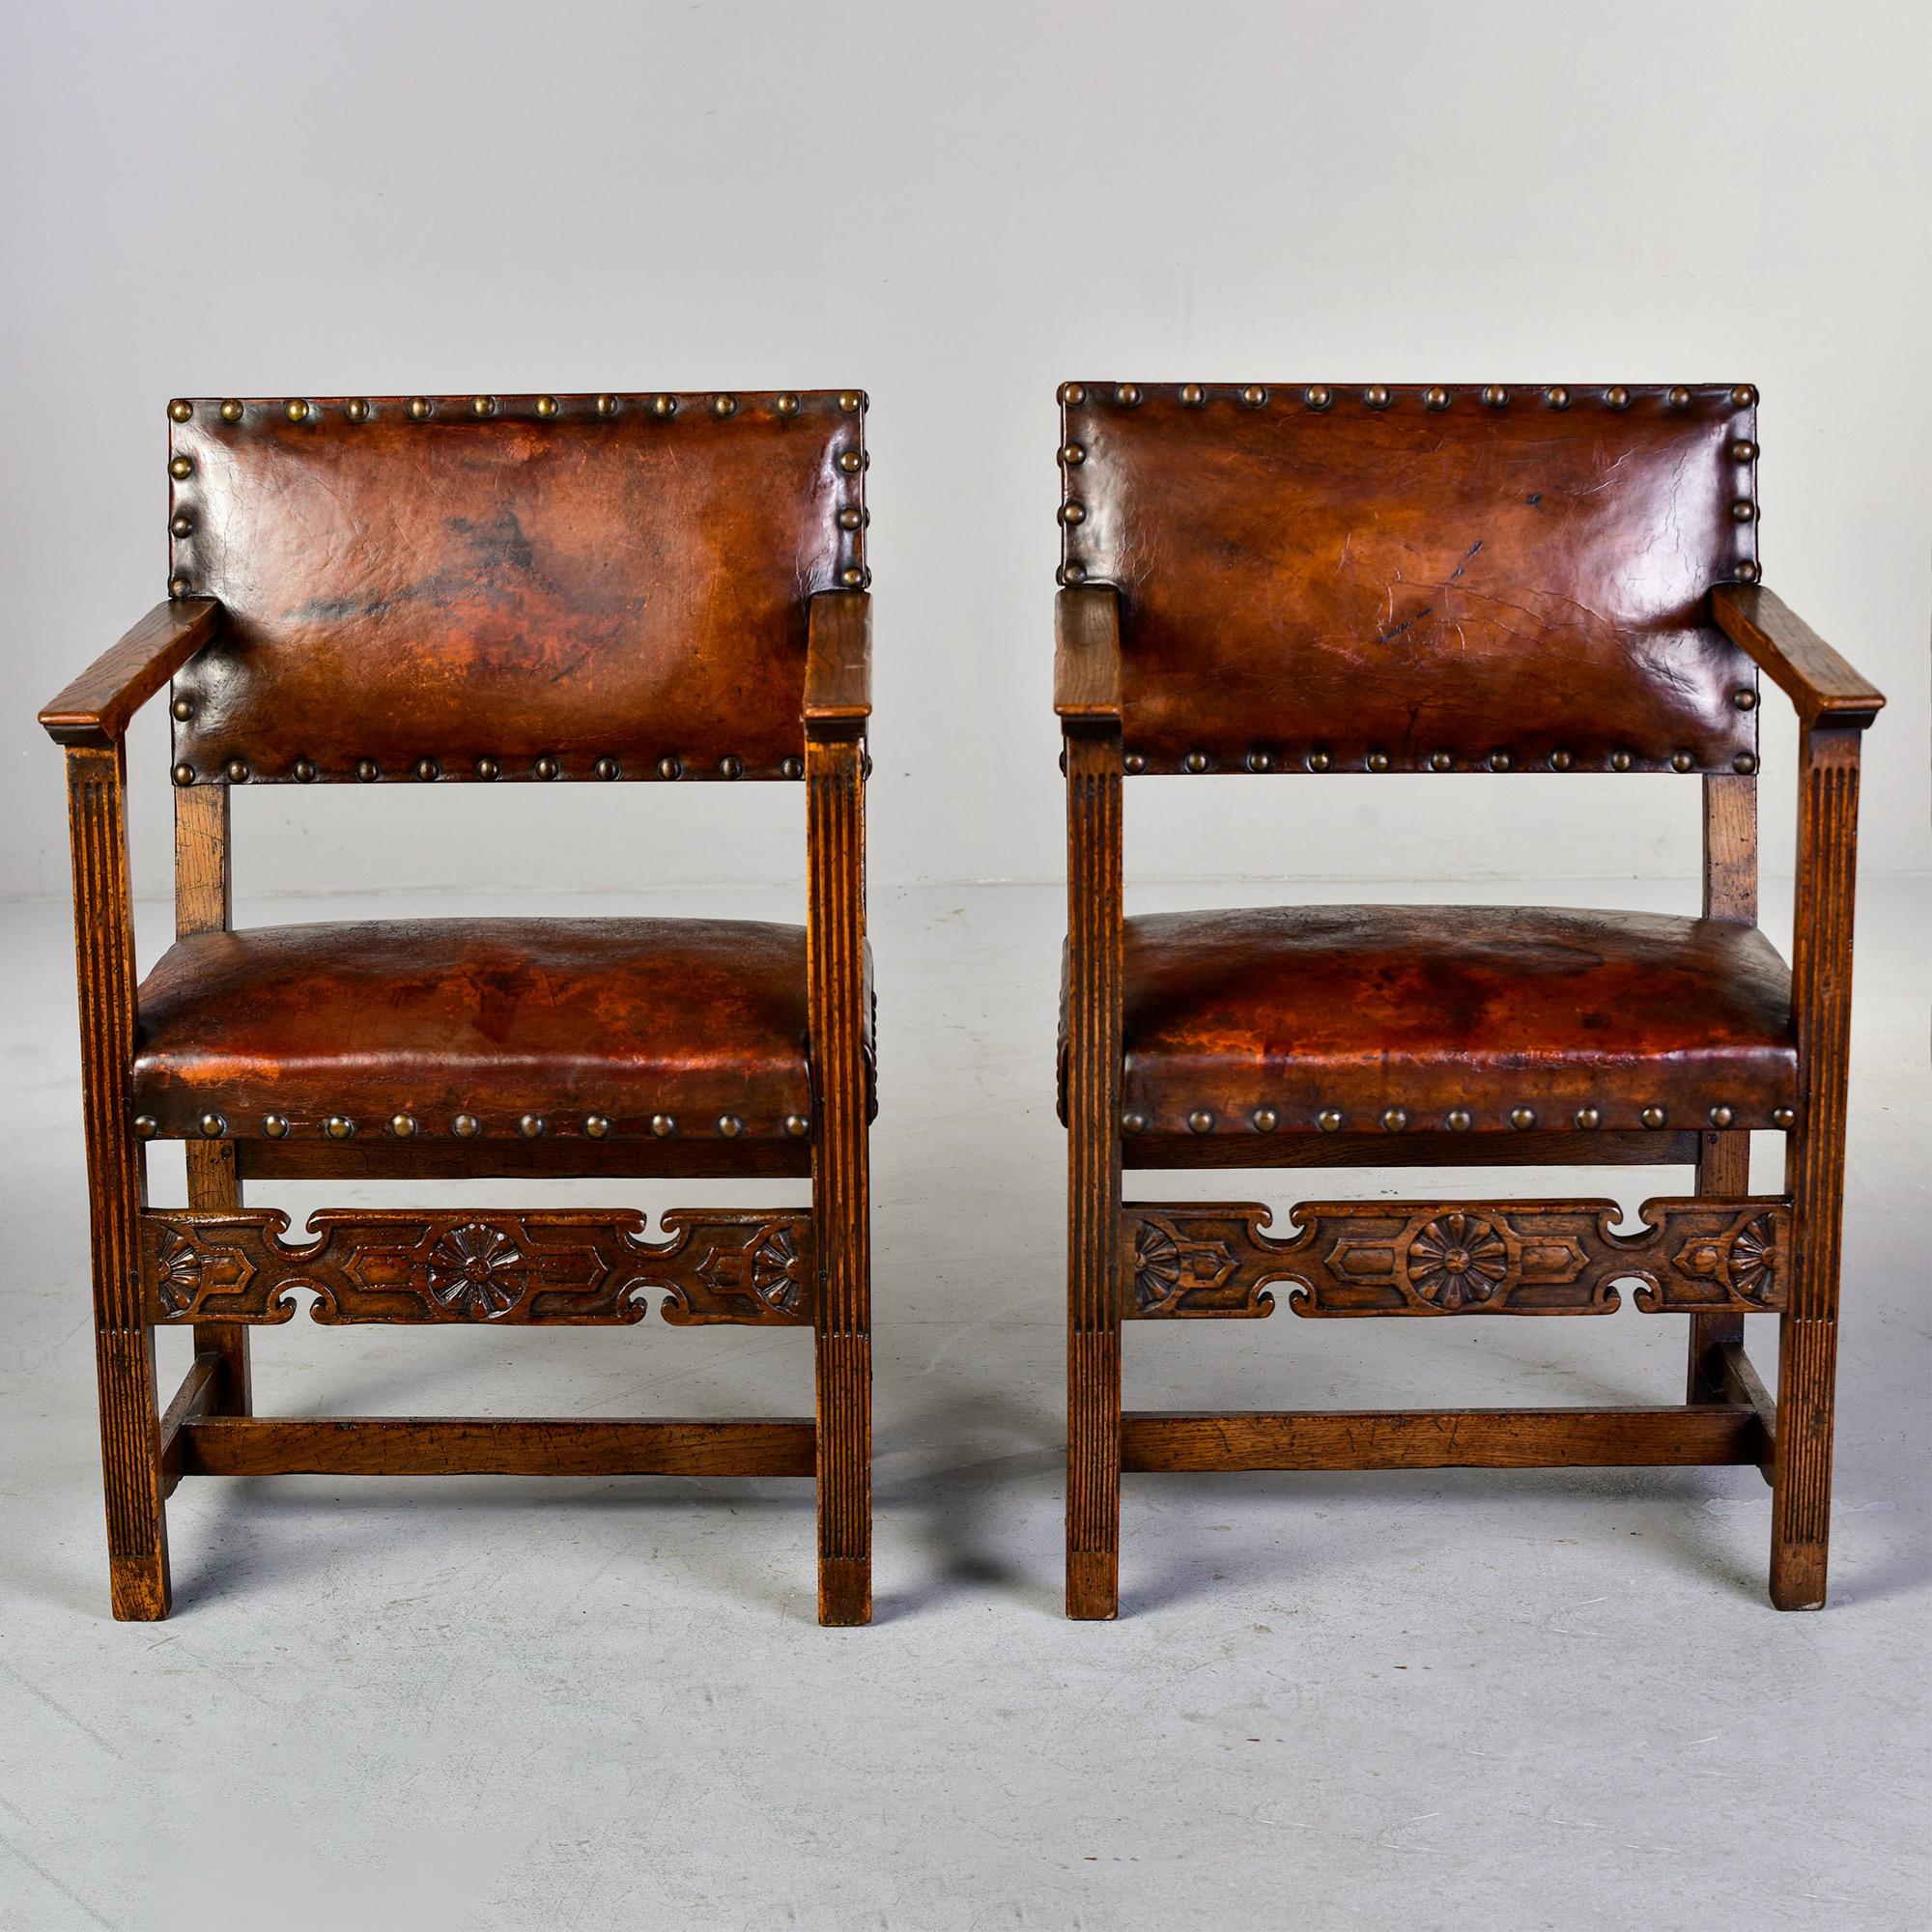 Circa 1930s pair of English oak arm chairs in Arts and Crafts style. Chairs feature carved details on stretchers, original leather affixed with large brass head tacks.

Very good antique condition with original leather and wood showing honest